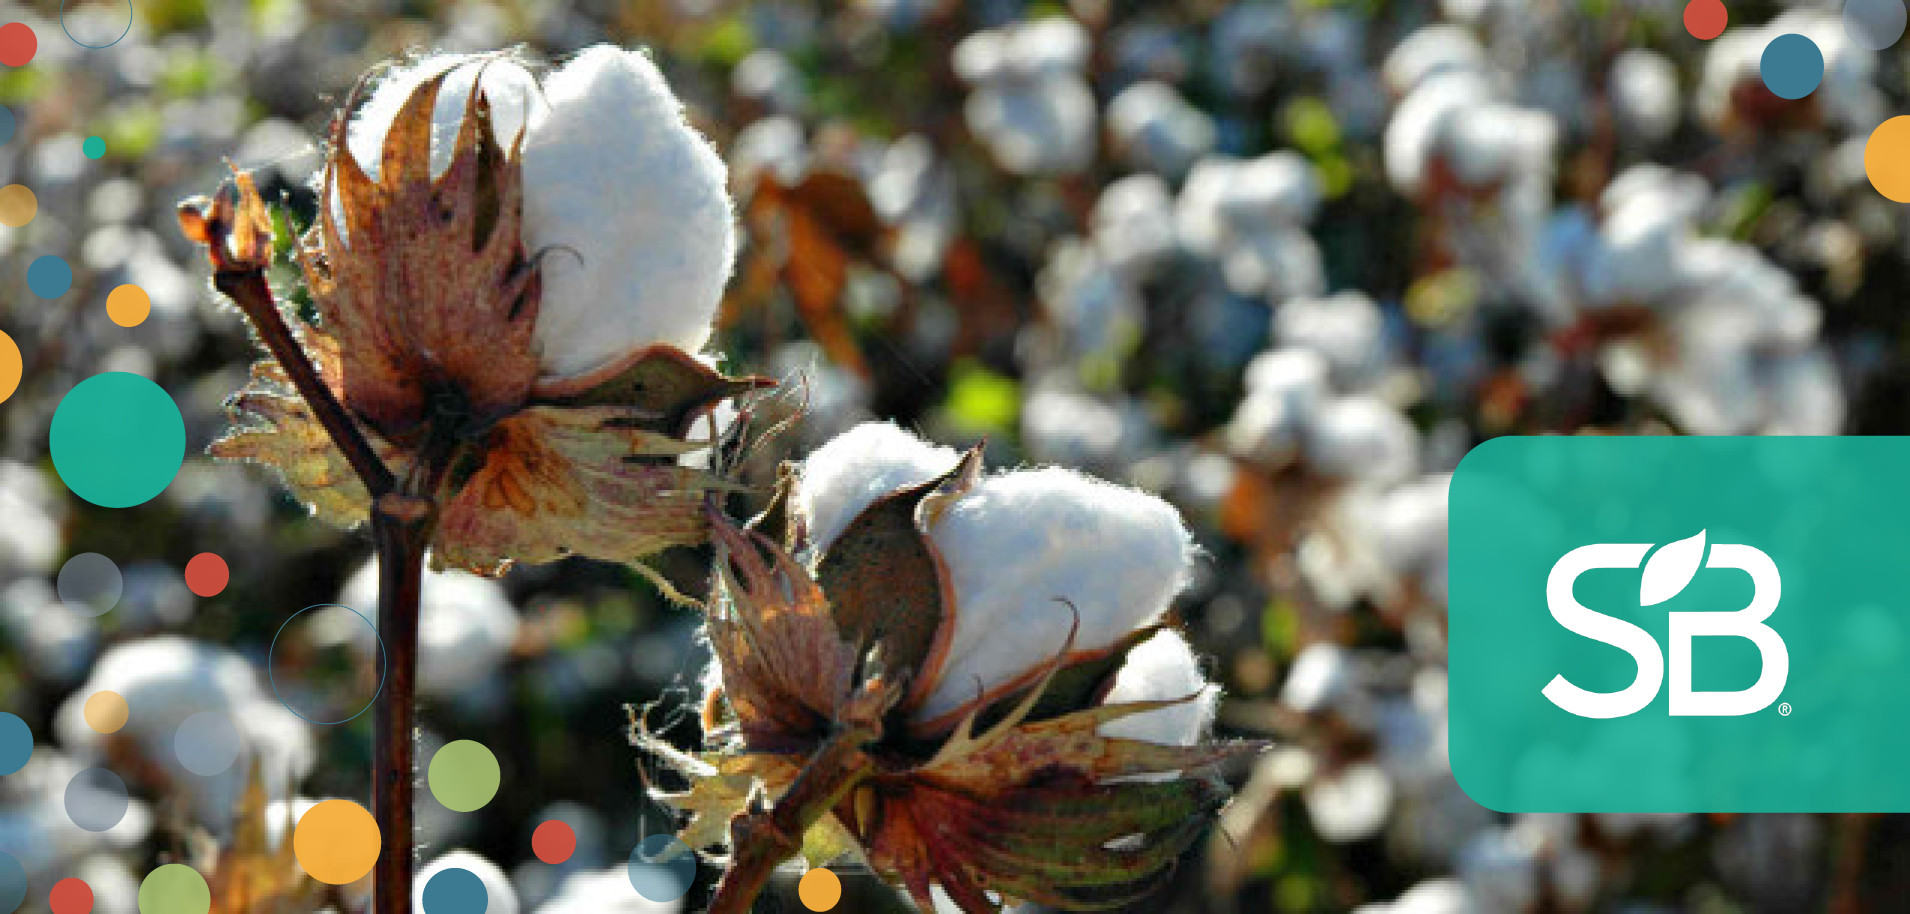 IKEA Says 100% of Its Cotton Now Comes from More Sustainable Sources ...